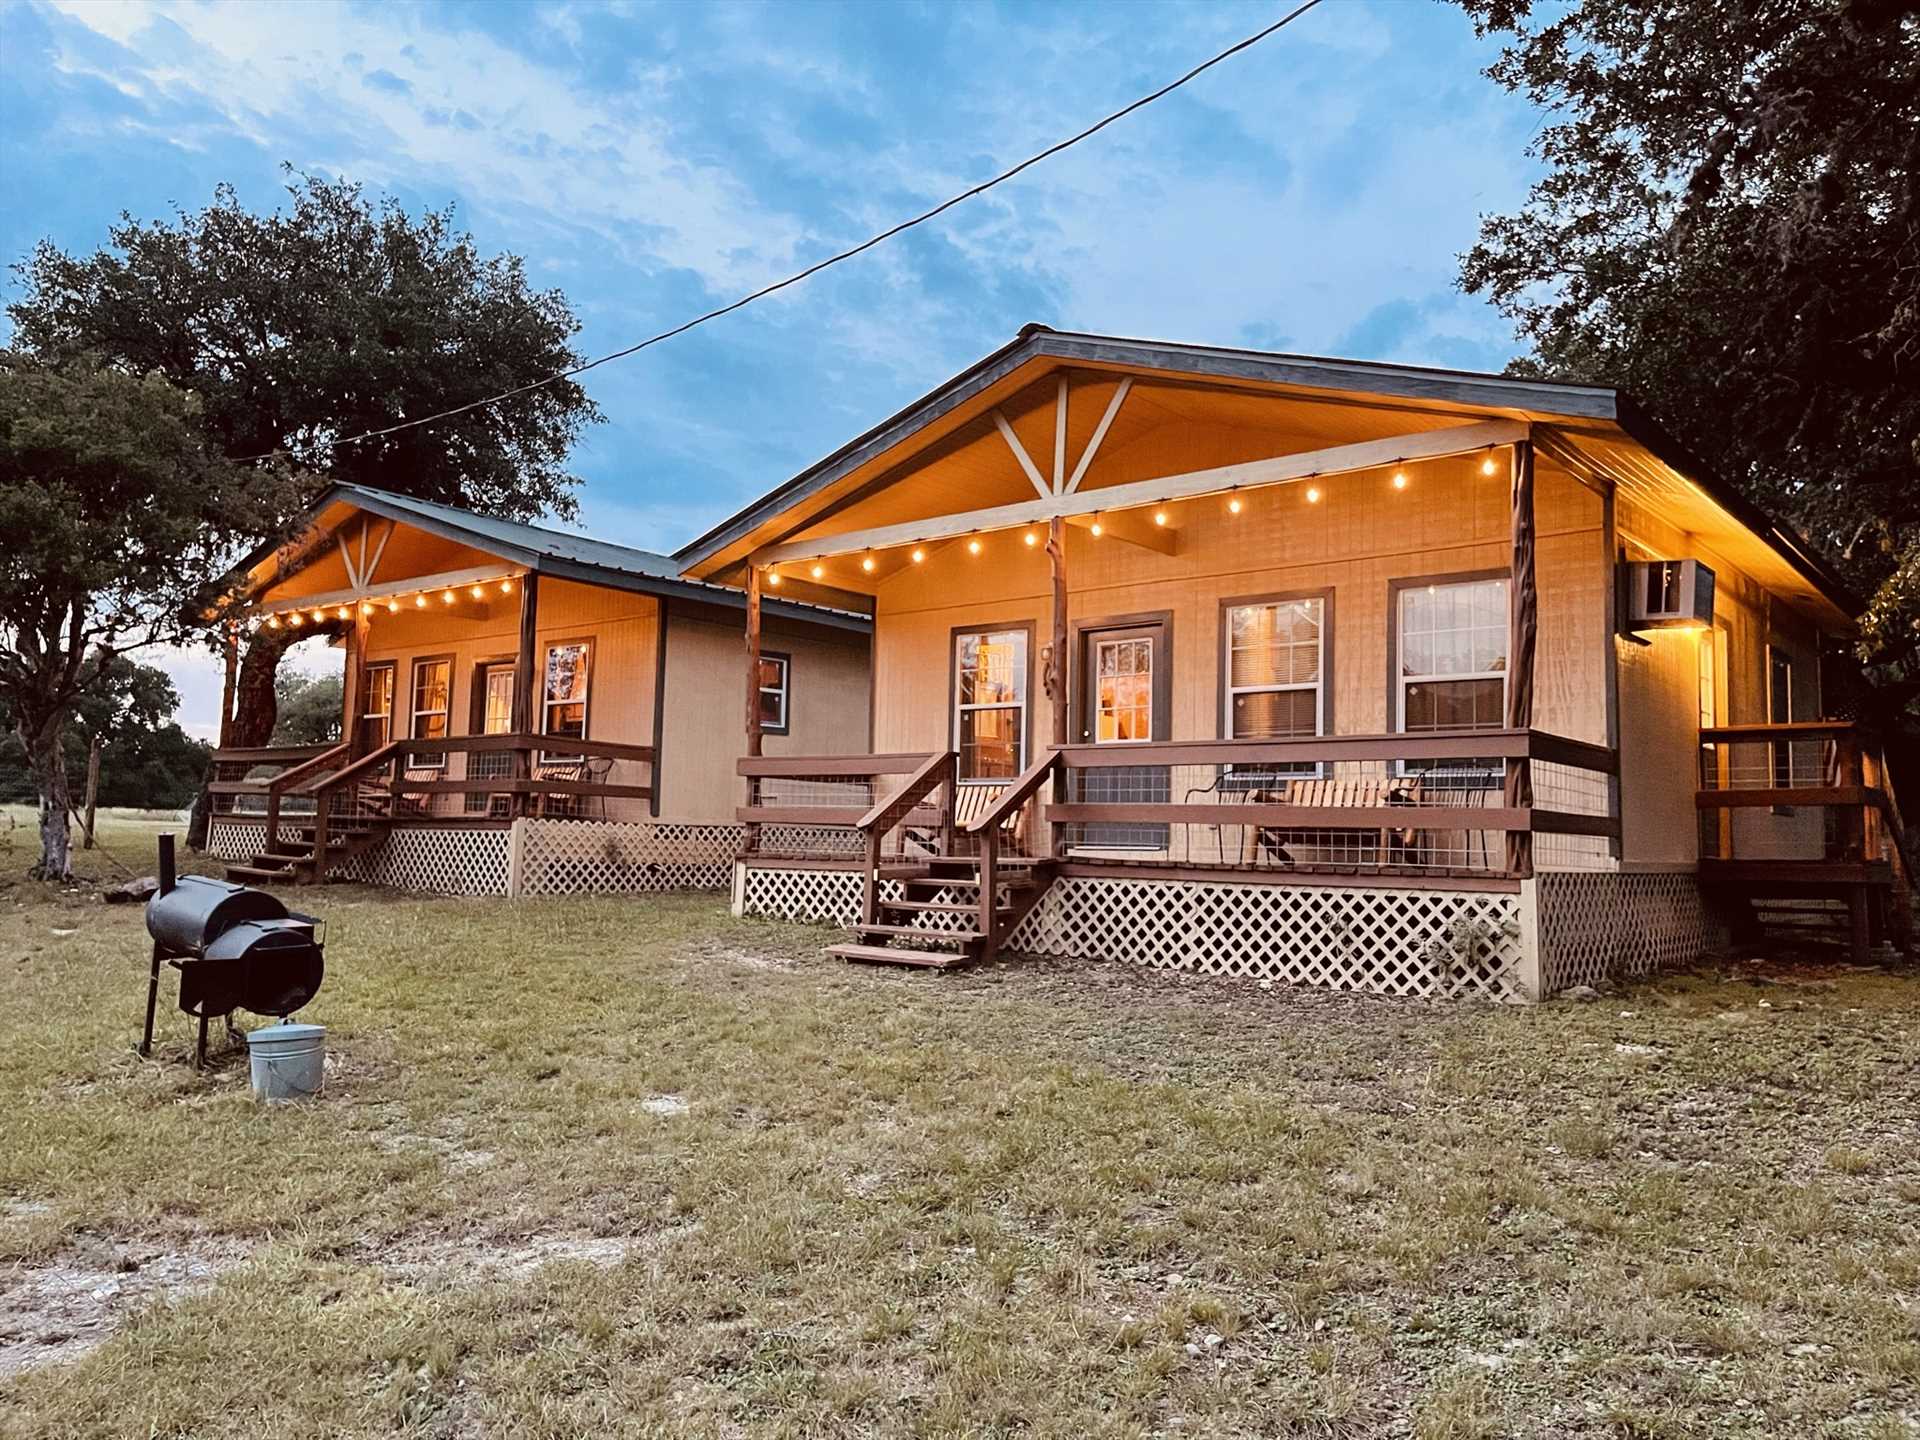                                                 The Gone Fishin' and Lone Star Cabins at the Retreat provide great accommodations for up to 14 more of your folks!